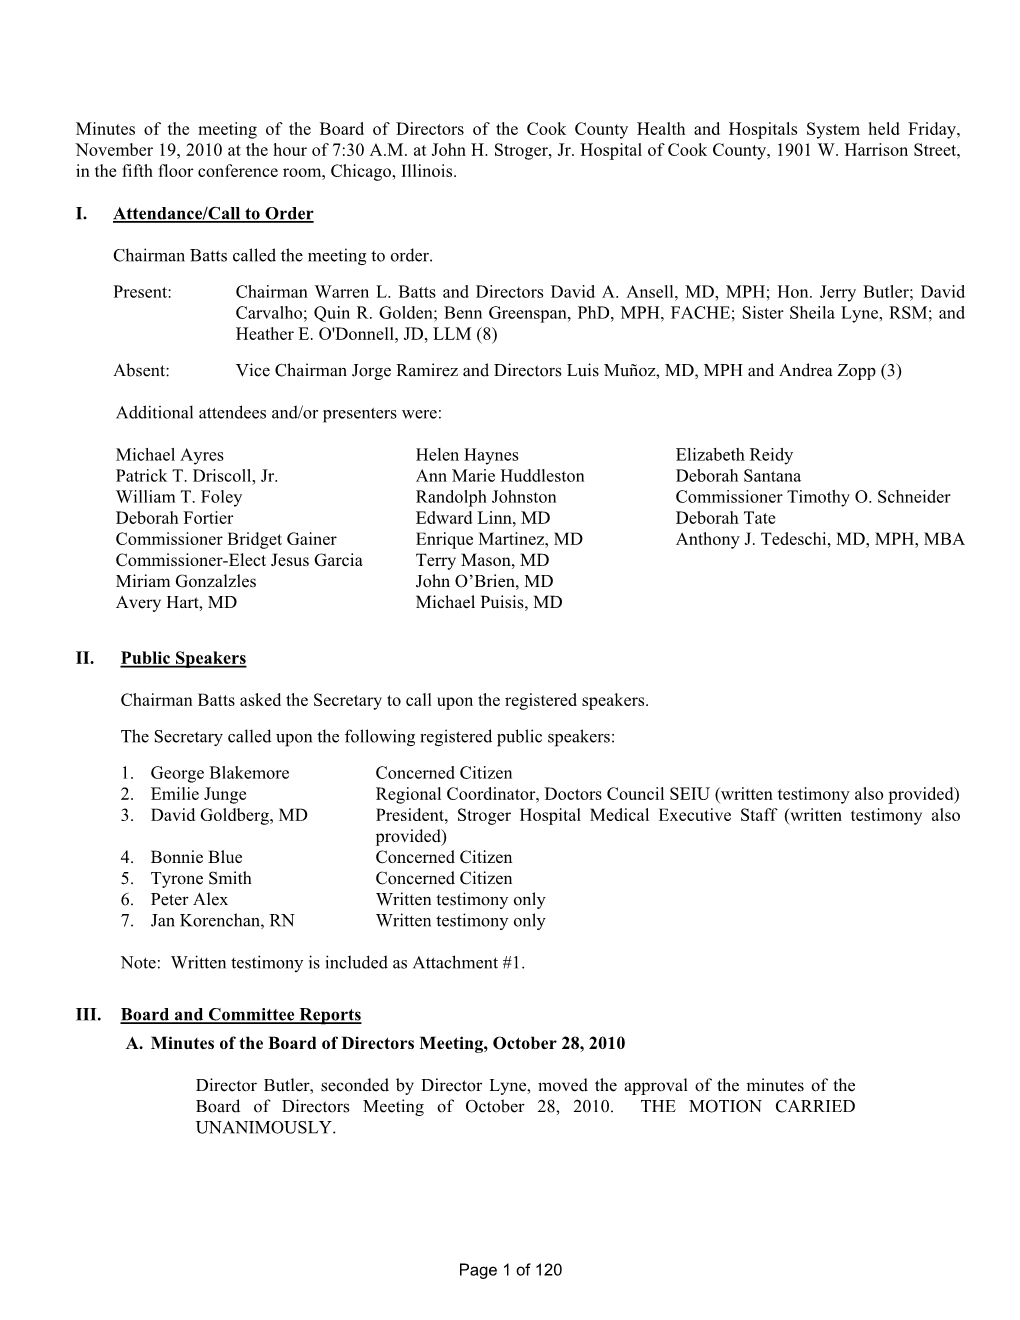 Minutes of the Meeting of the Board of Directors of the Cook County Health and Hospitals System Held Friday, November 19, 2010 at the Hour of 7:30 A.M